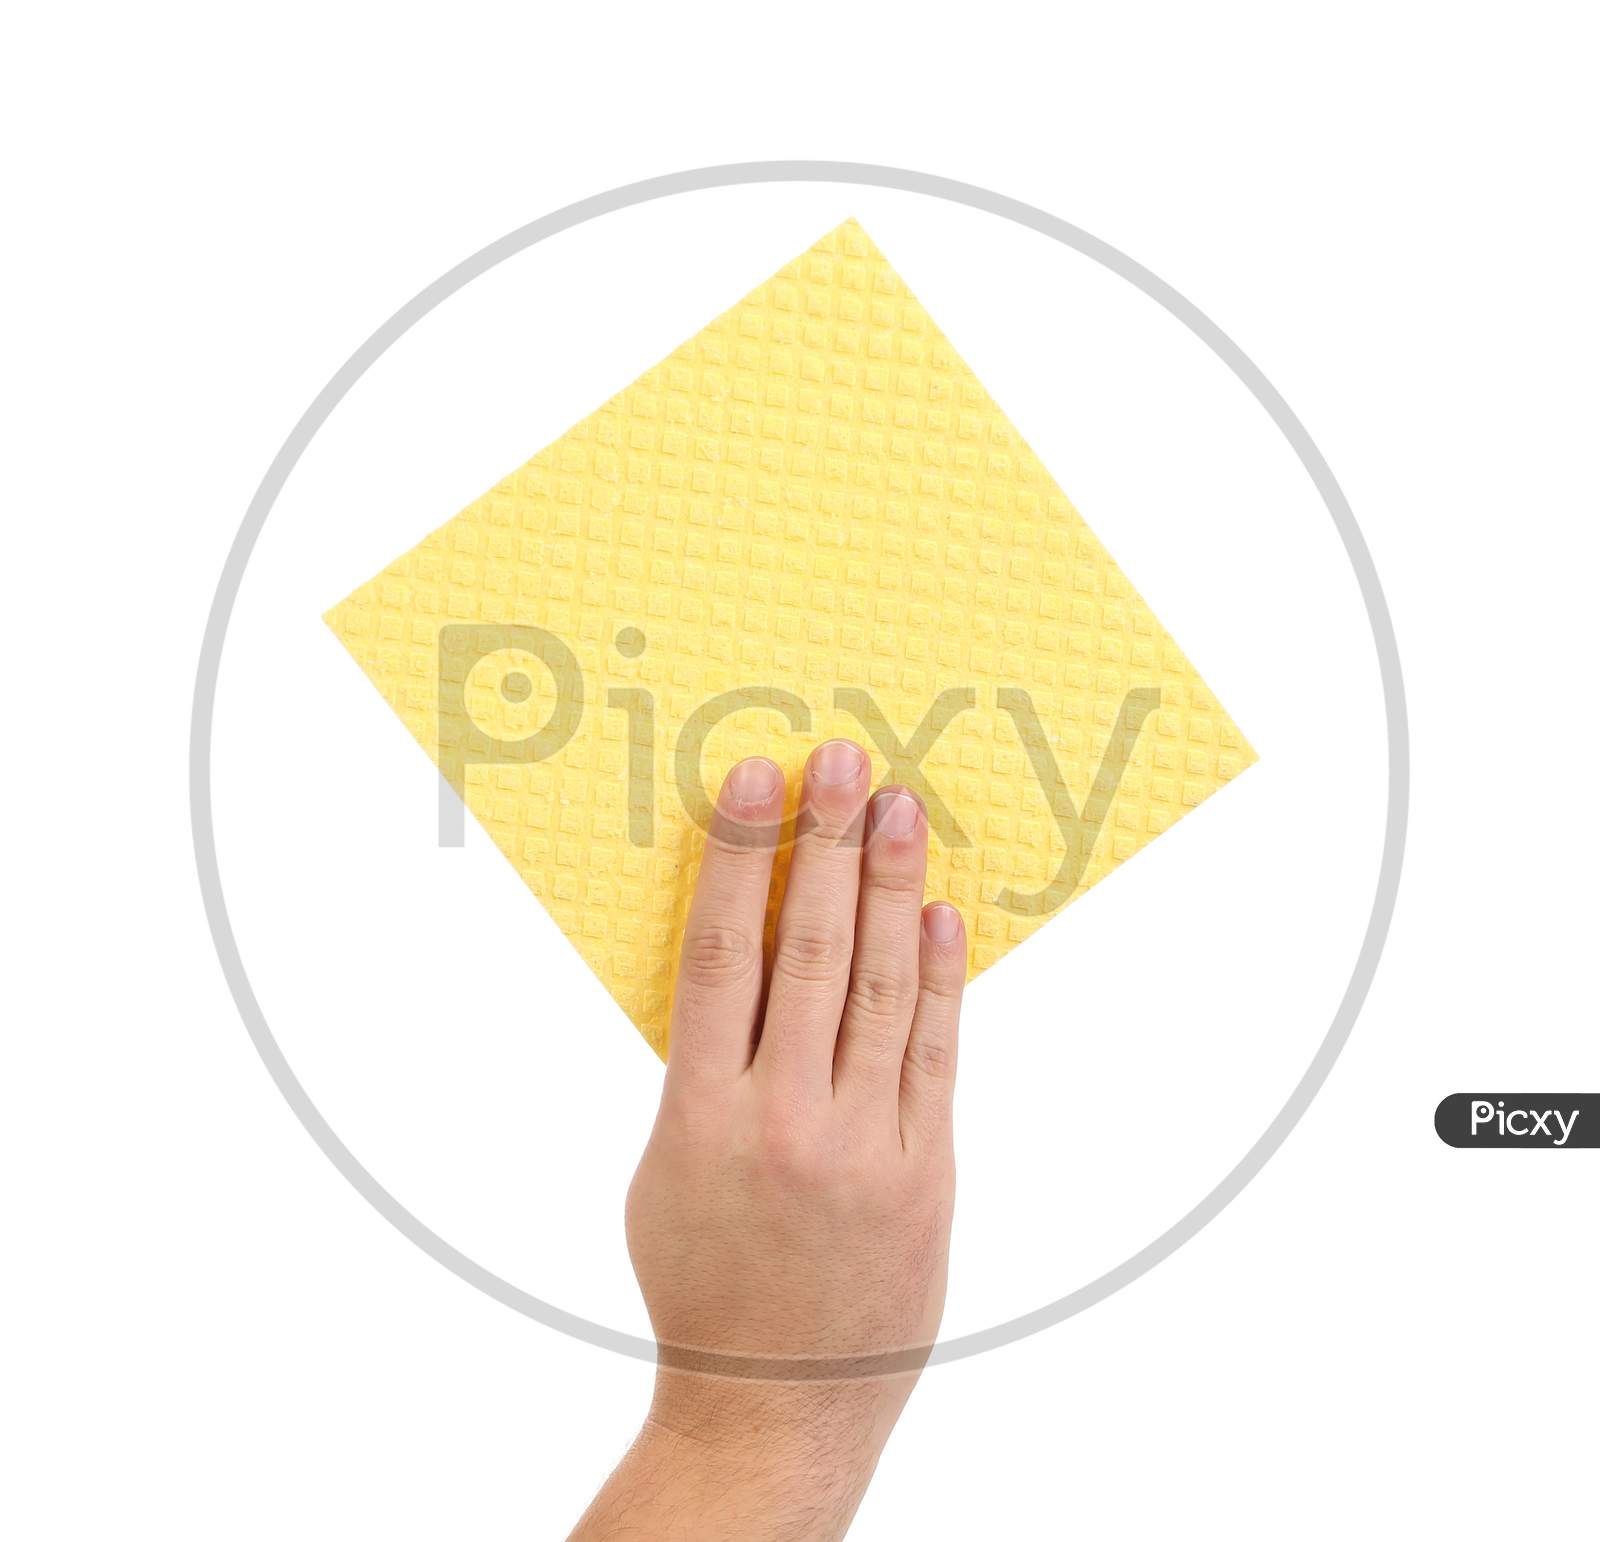 Hand Holds Yellow Cleaning Sponge. Isolated On A White Background.